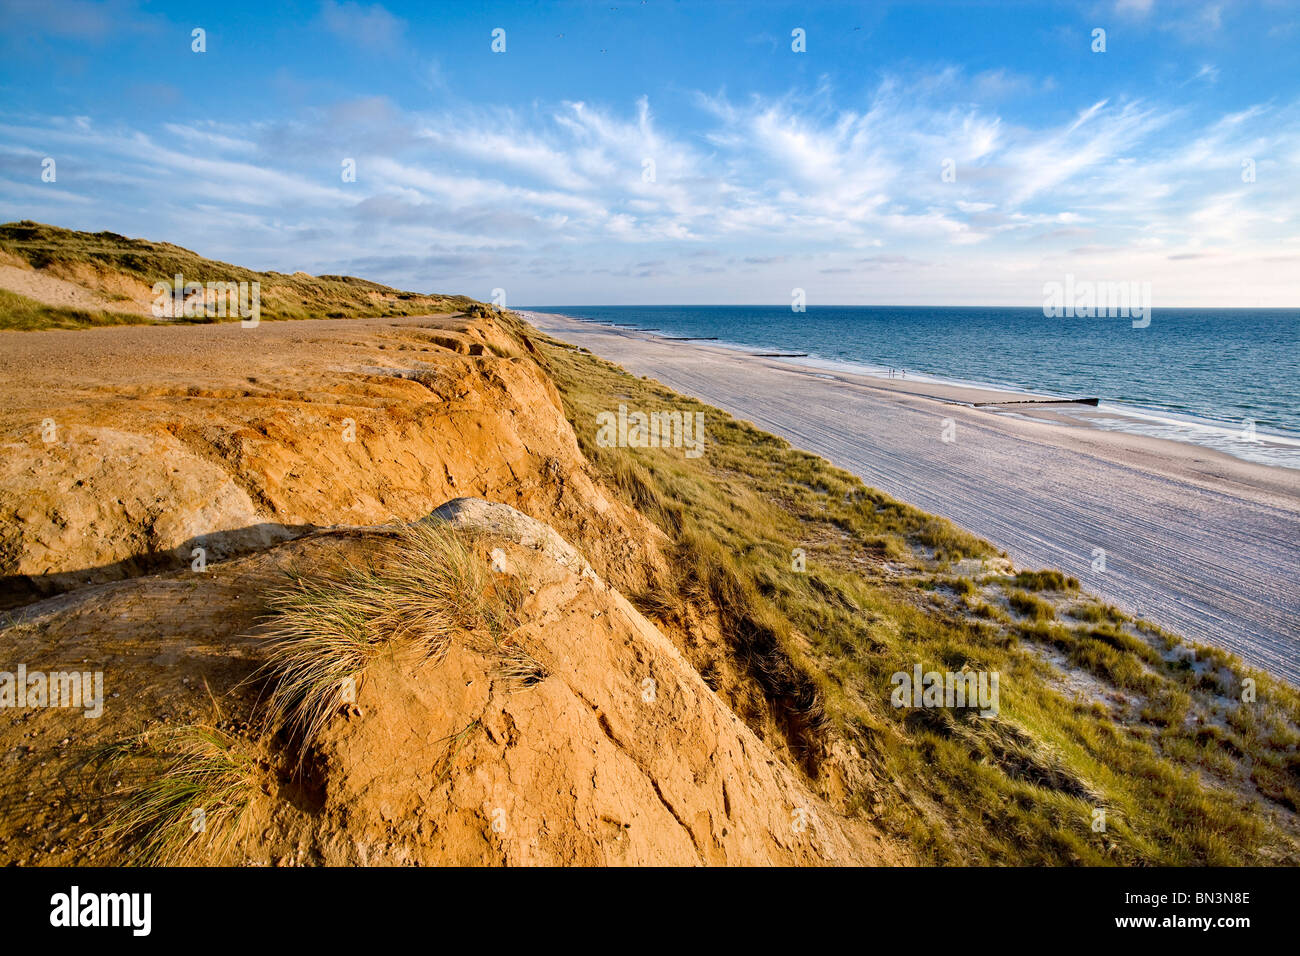 Cliff (Rotes Kliff) at the western coast of Sylt, Germany, elevated view Stock Photo